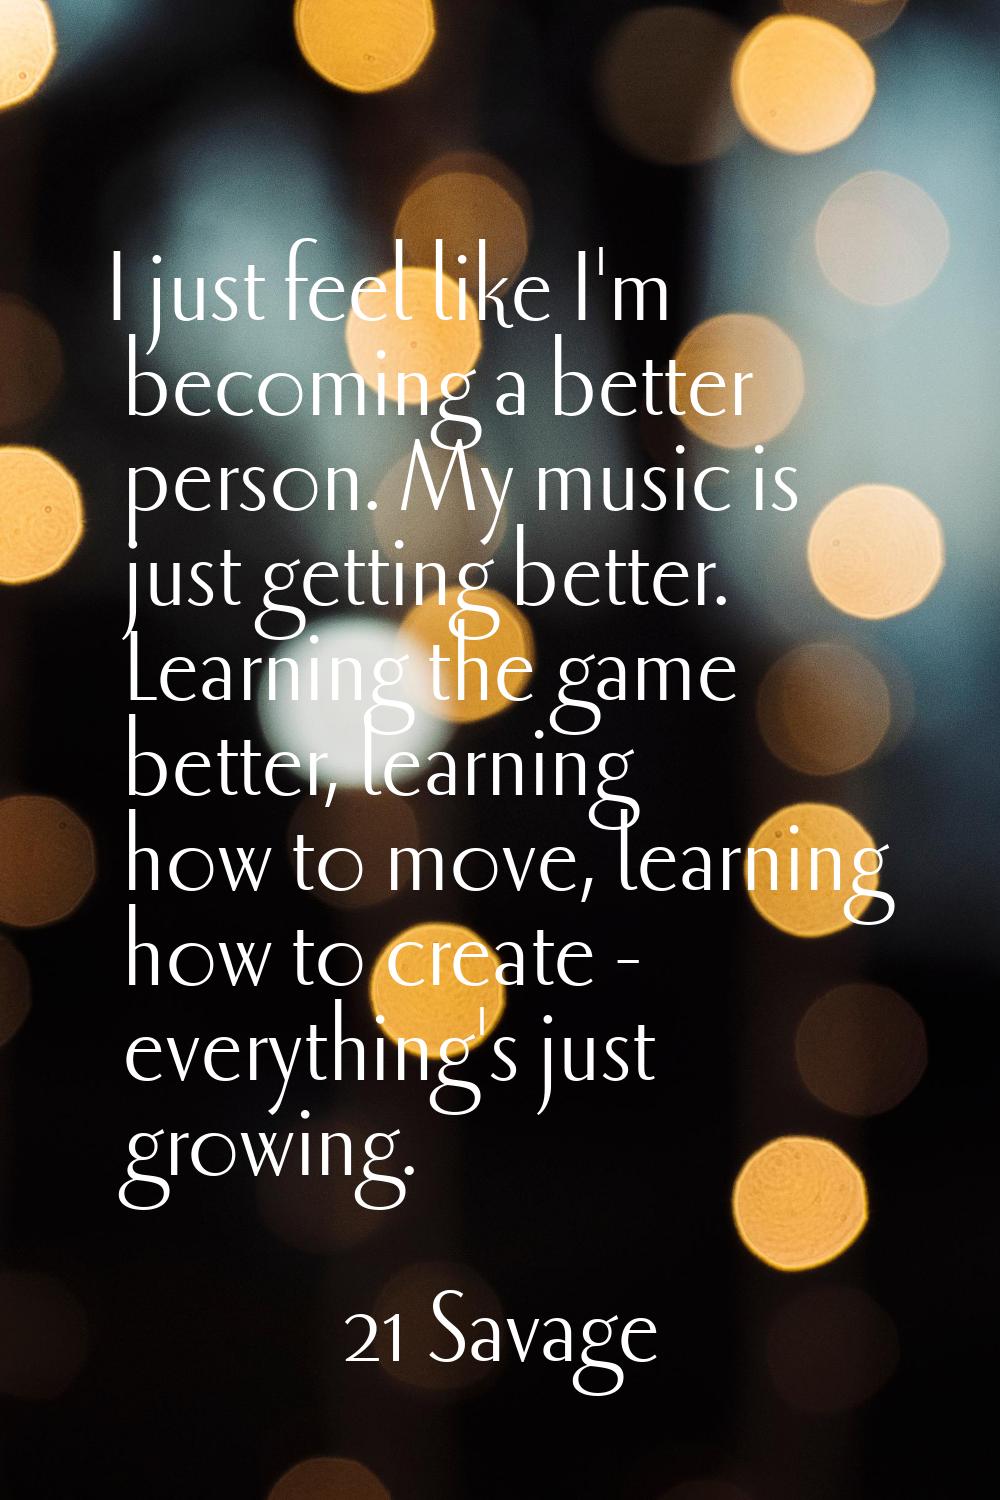 I just feel like I'm becoming a better person. My music is just getting better. Learning the game b